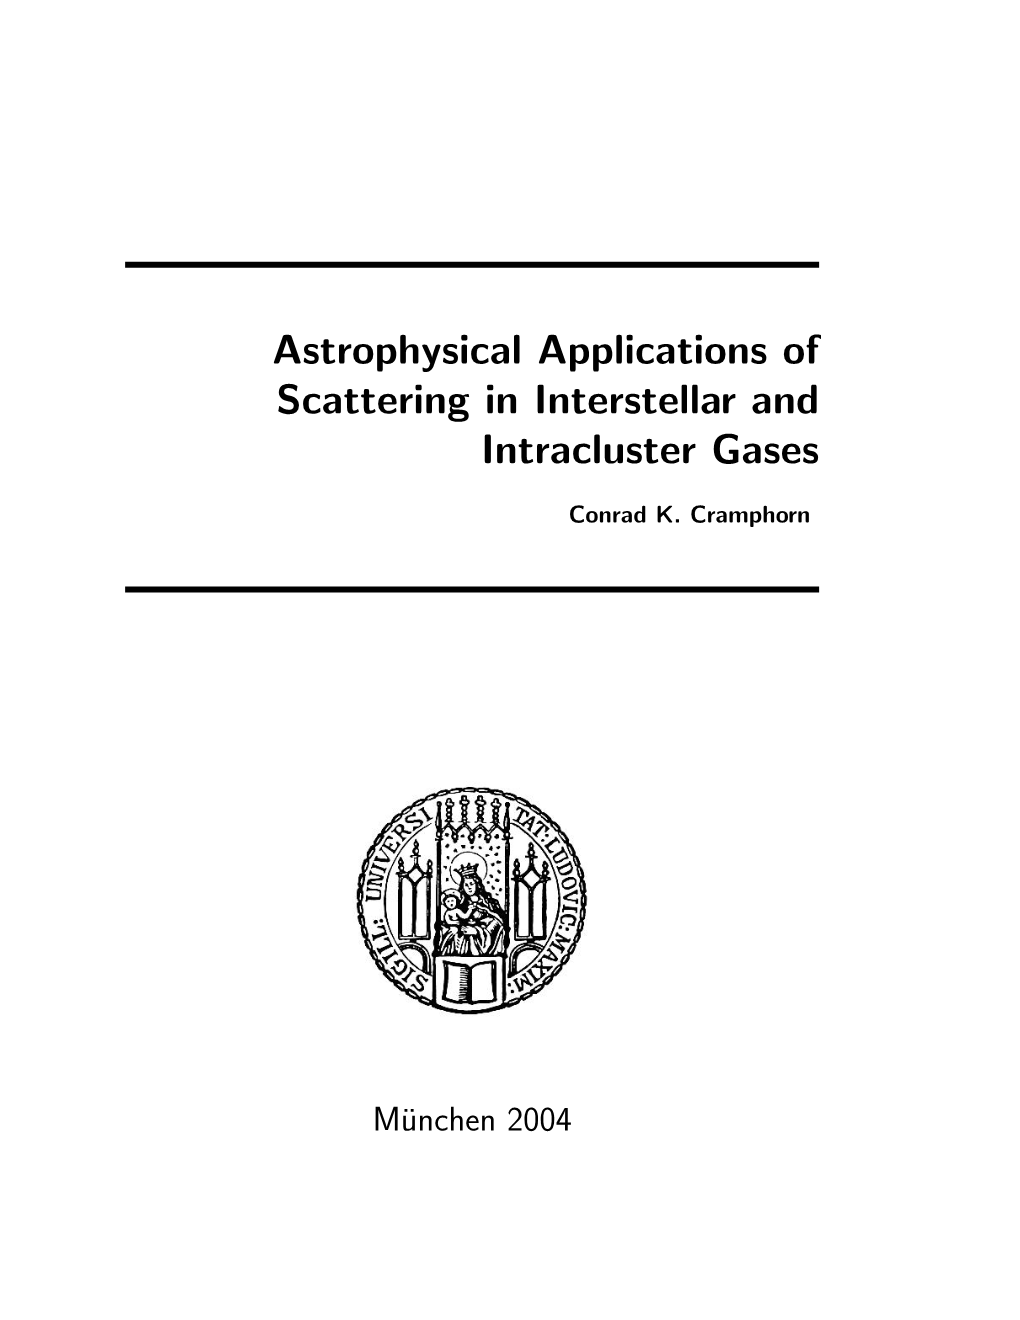 Astrophysical Applications of Scattering in Interstellar and Intracluster Gases